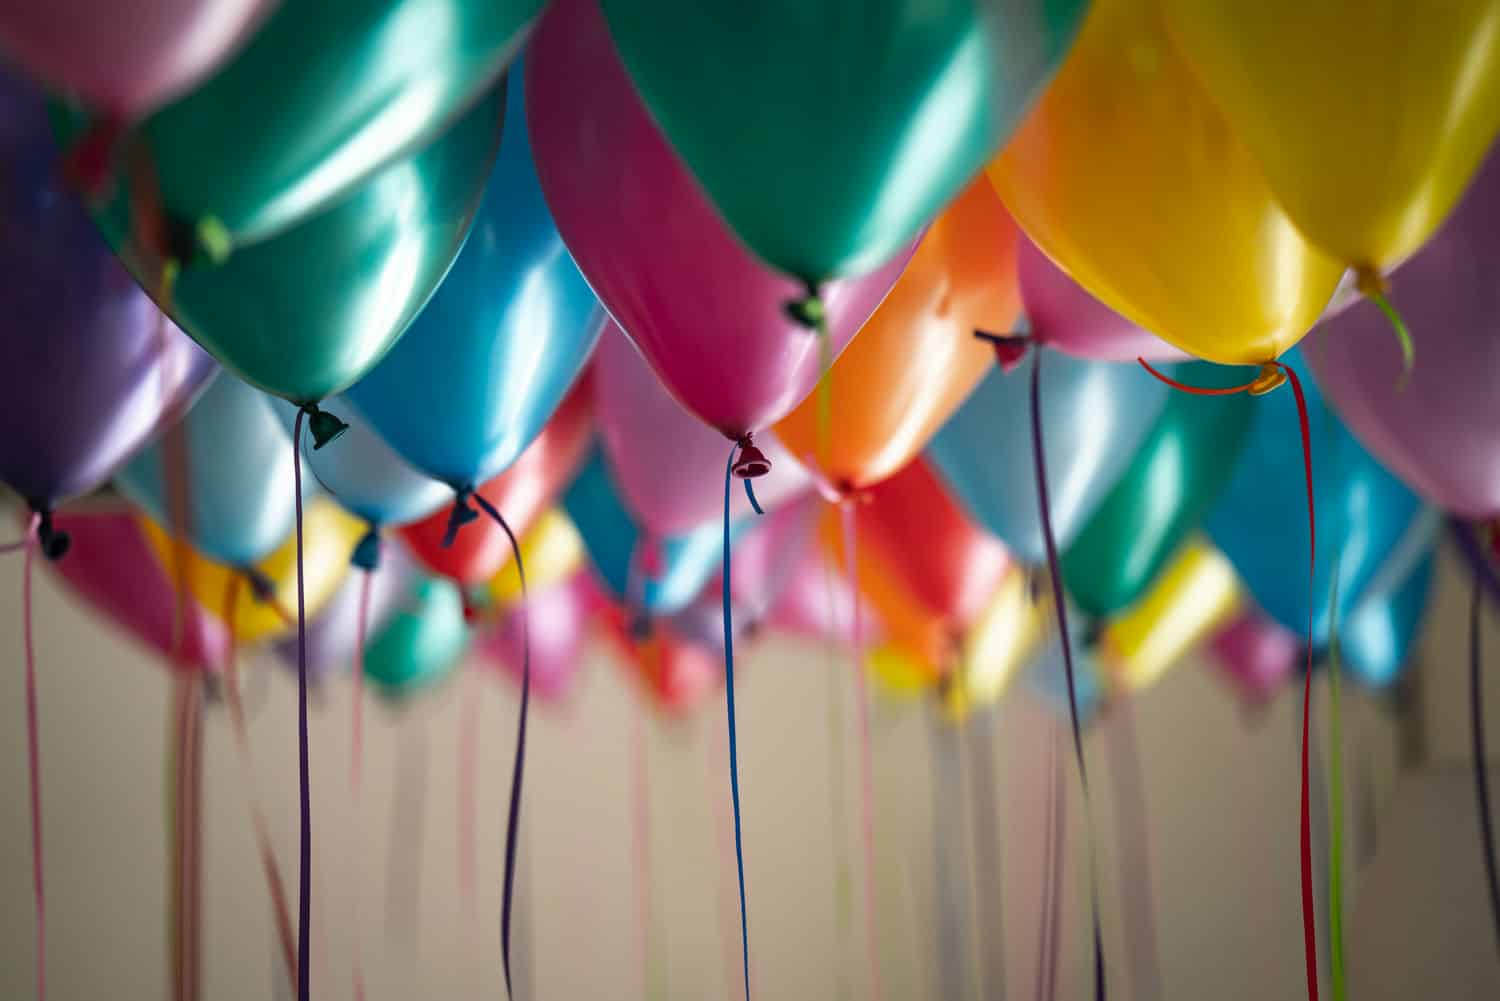 10 tips for planning a fun, simple kid’s birthday party